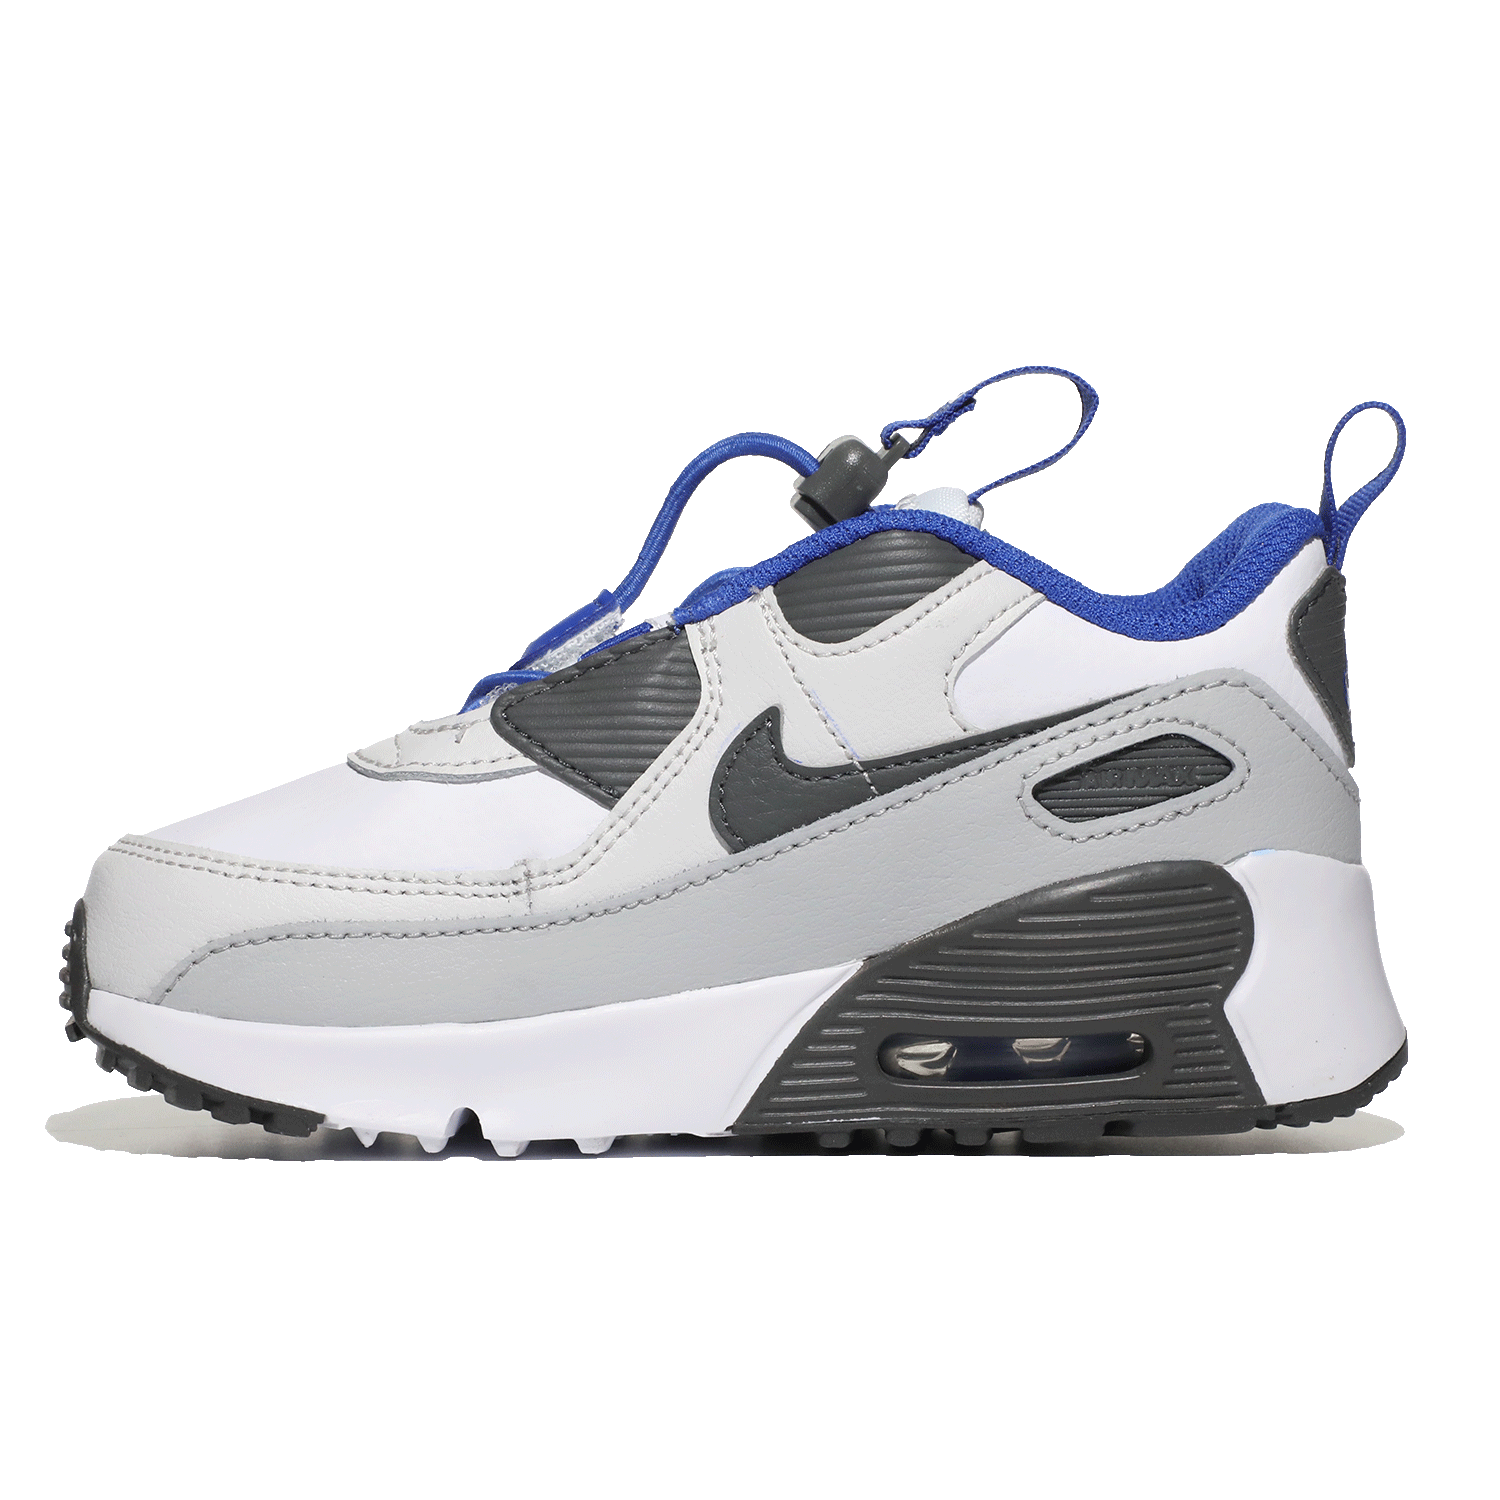 Image 6 of Air Max 90 Toggle (Infant/Toddler)